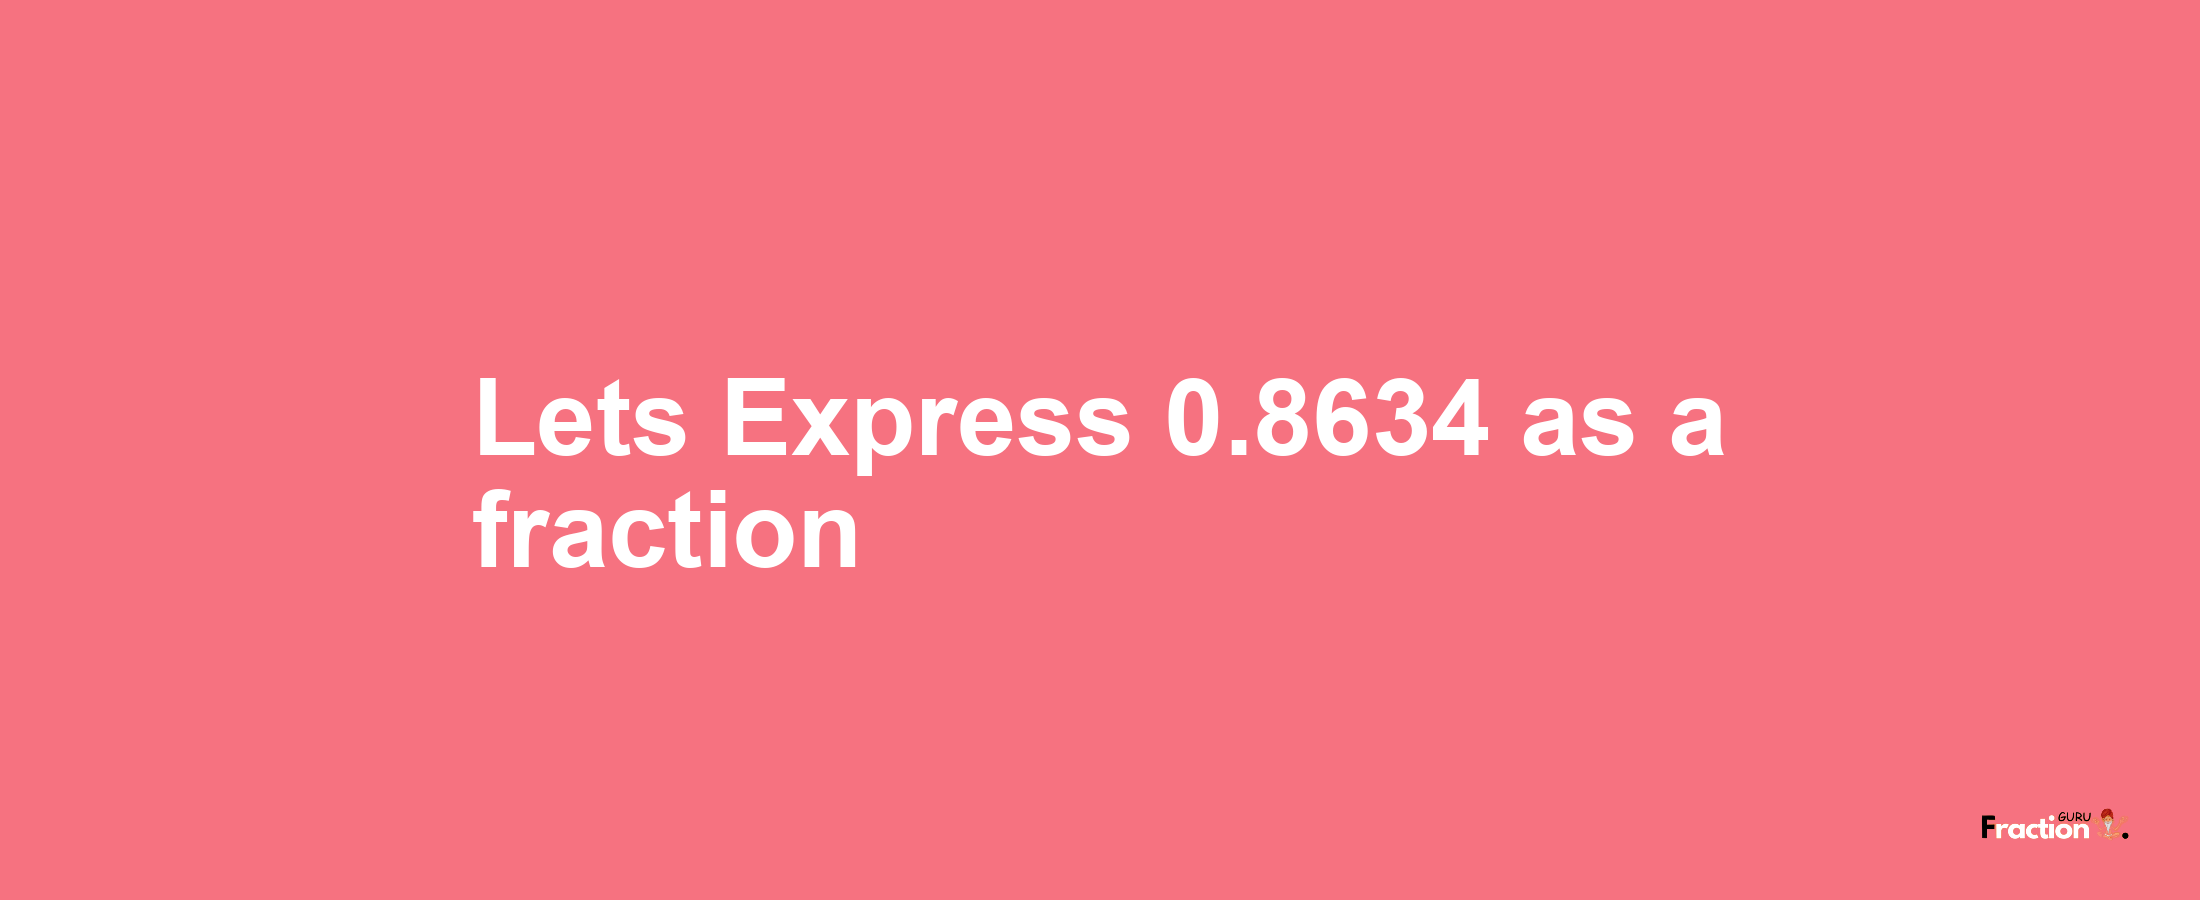 Lets Express 0.8634 as afraction